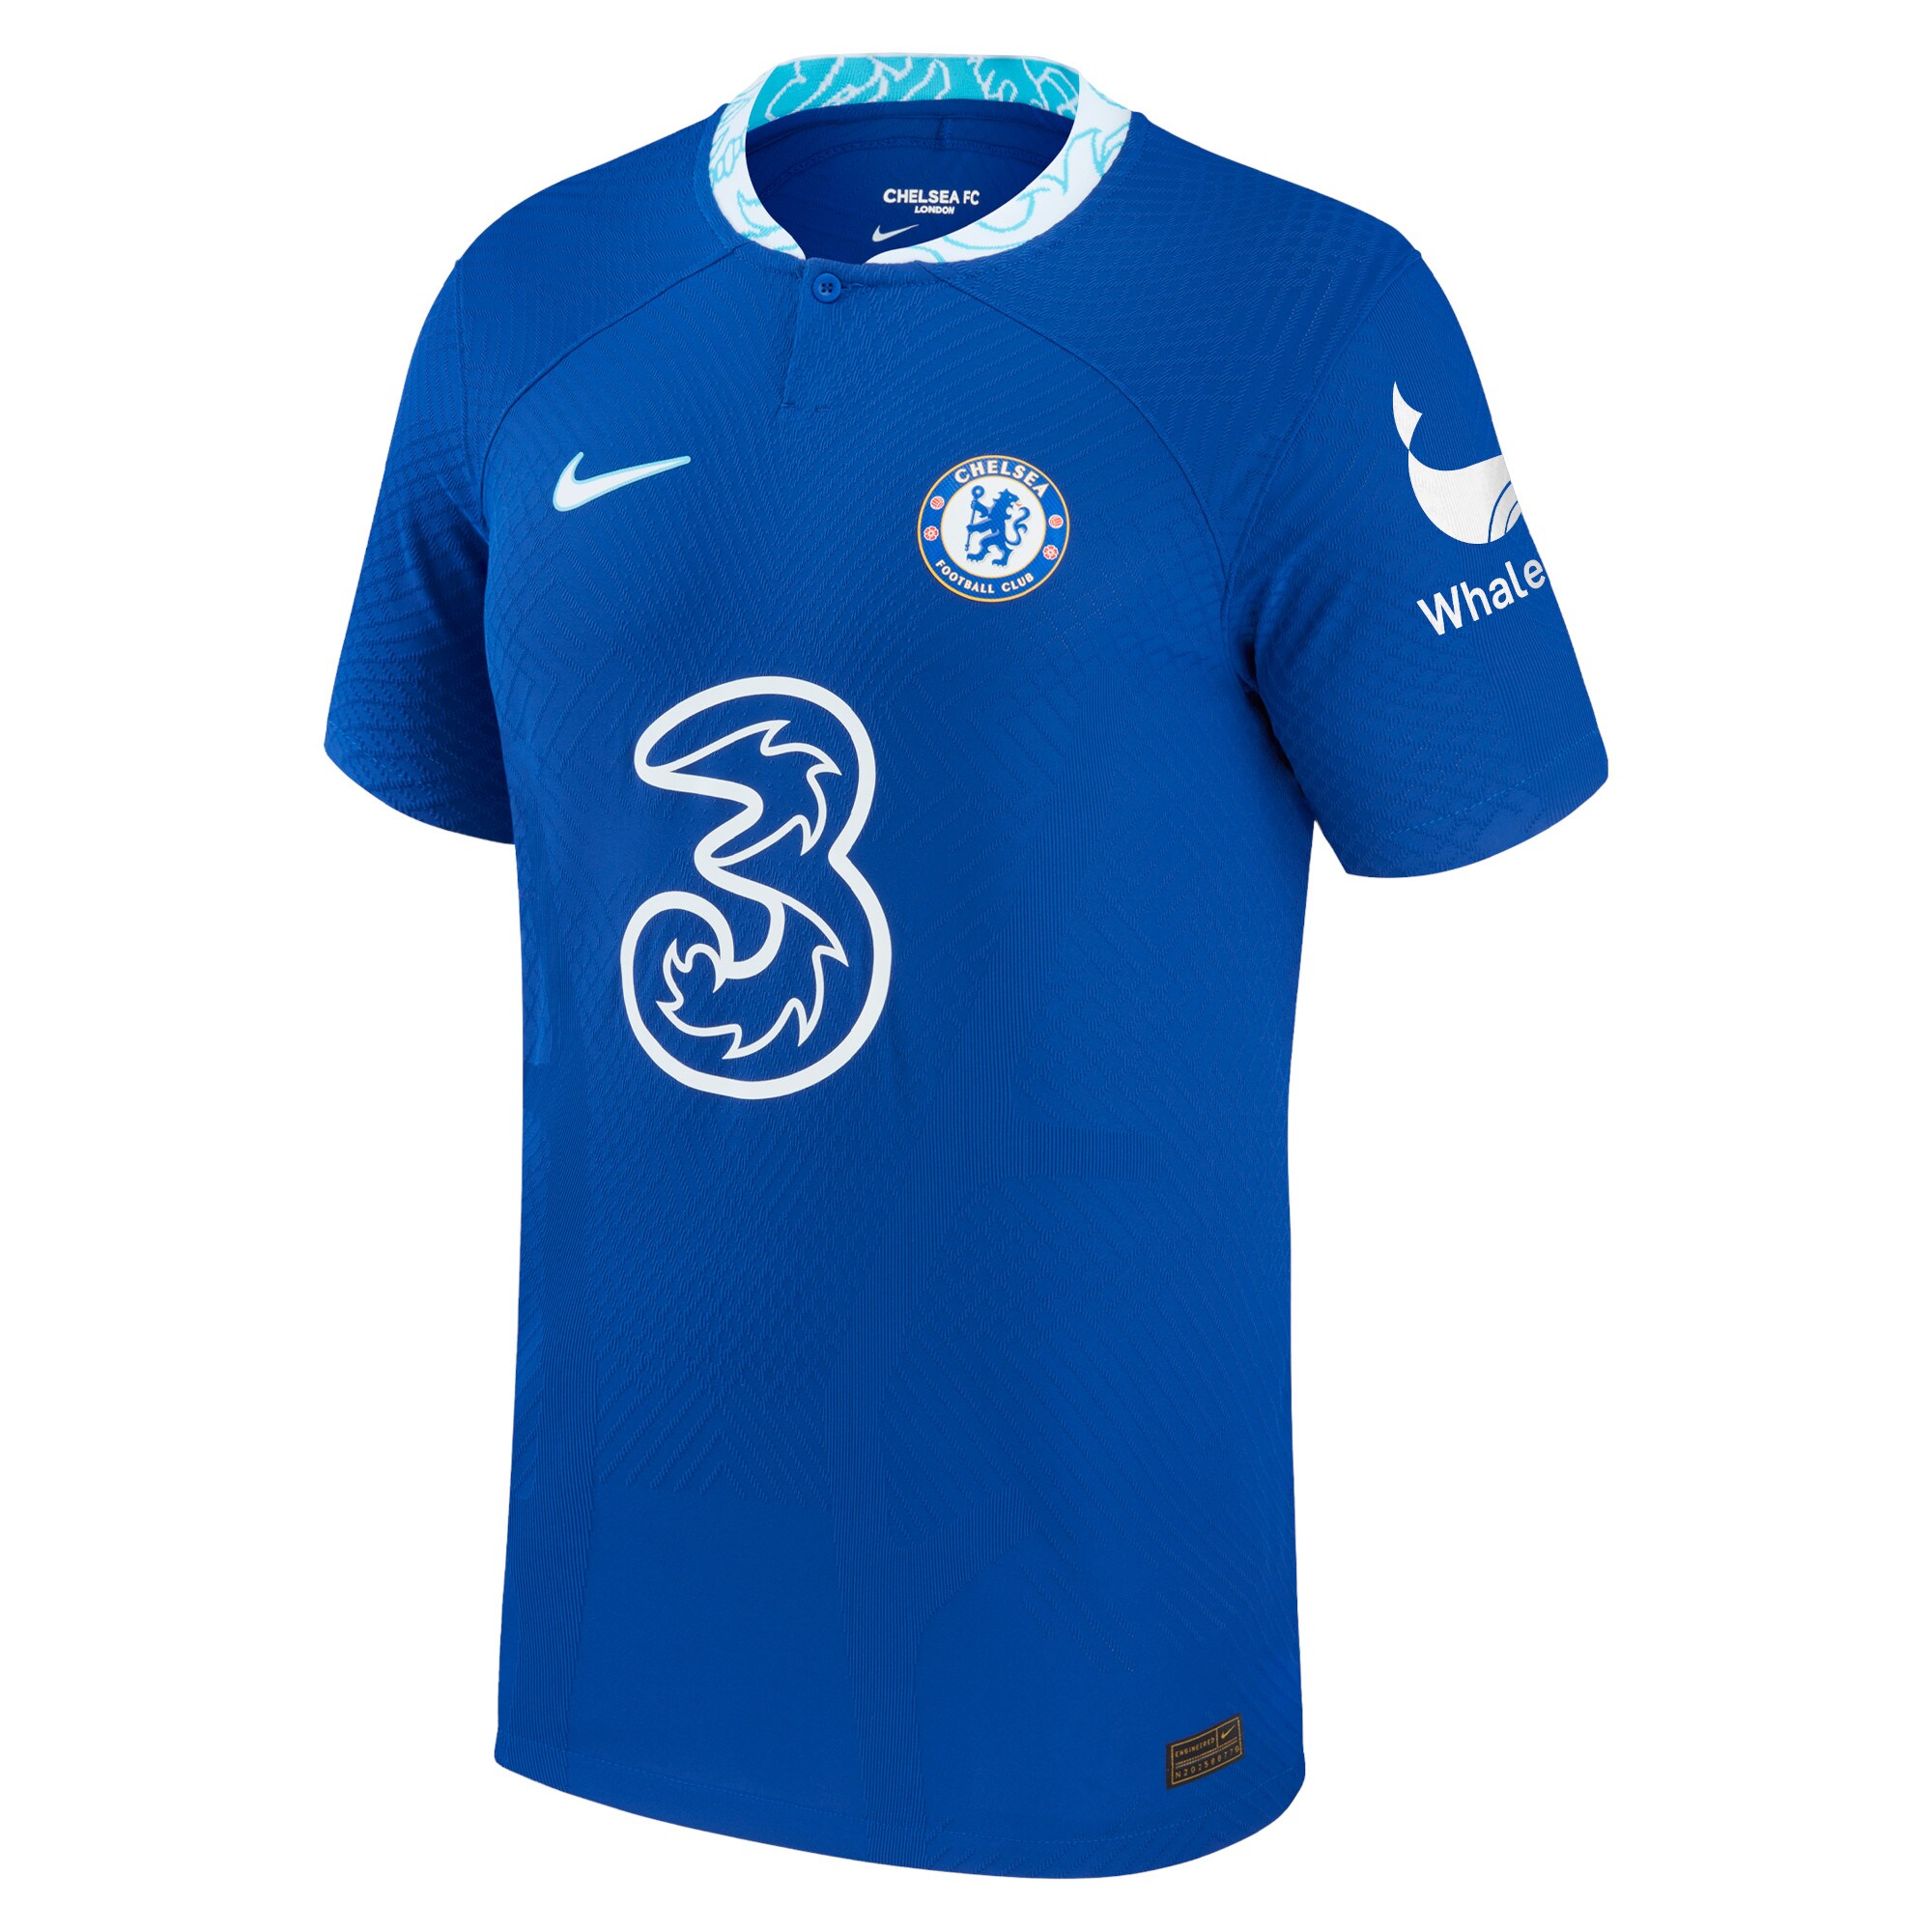 Chelsea WSL Home Vapor Match Shirt 2022-23 with Eriksson 16 printing